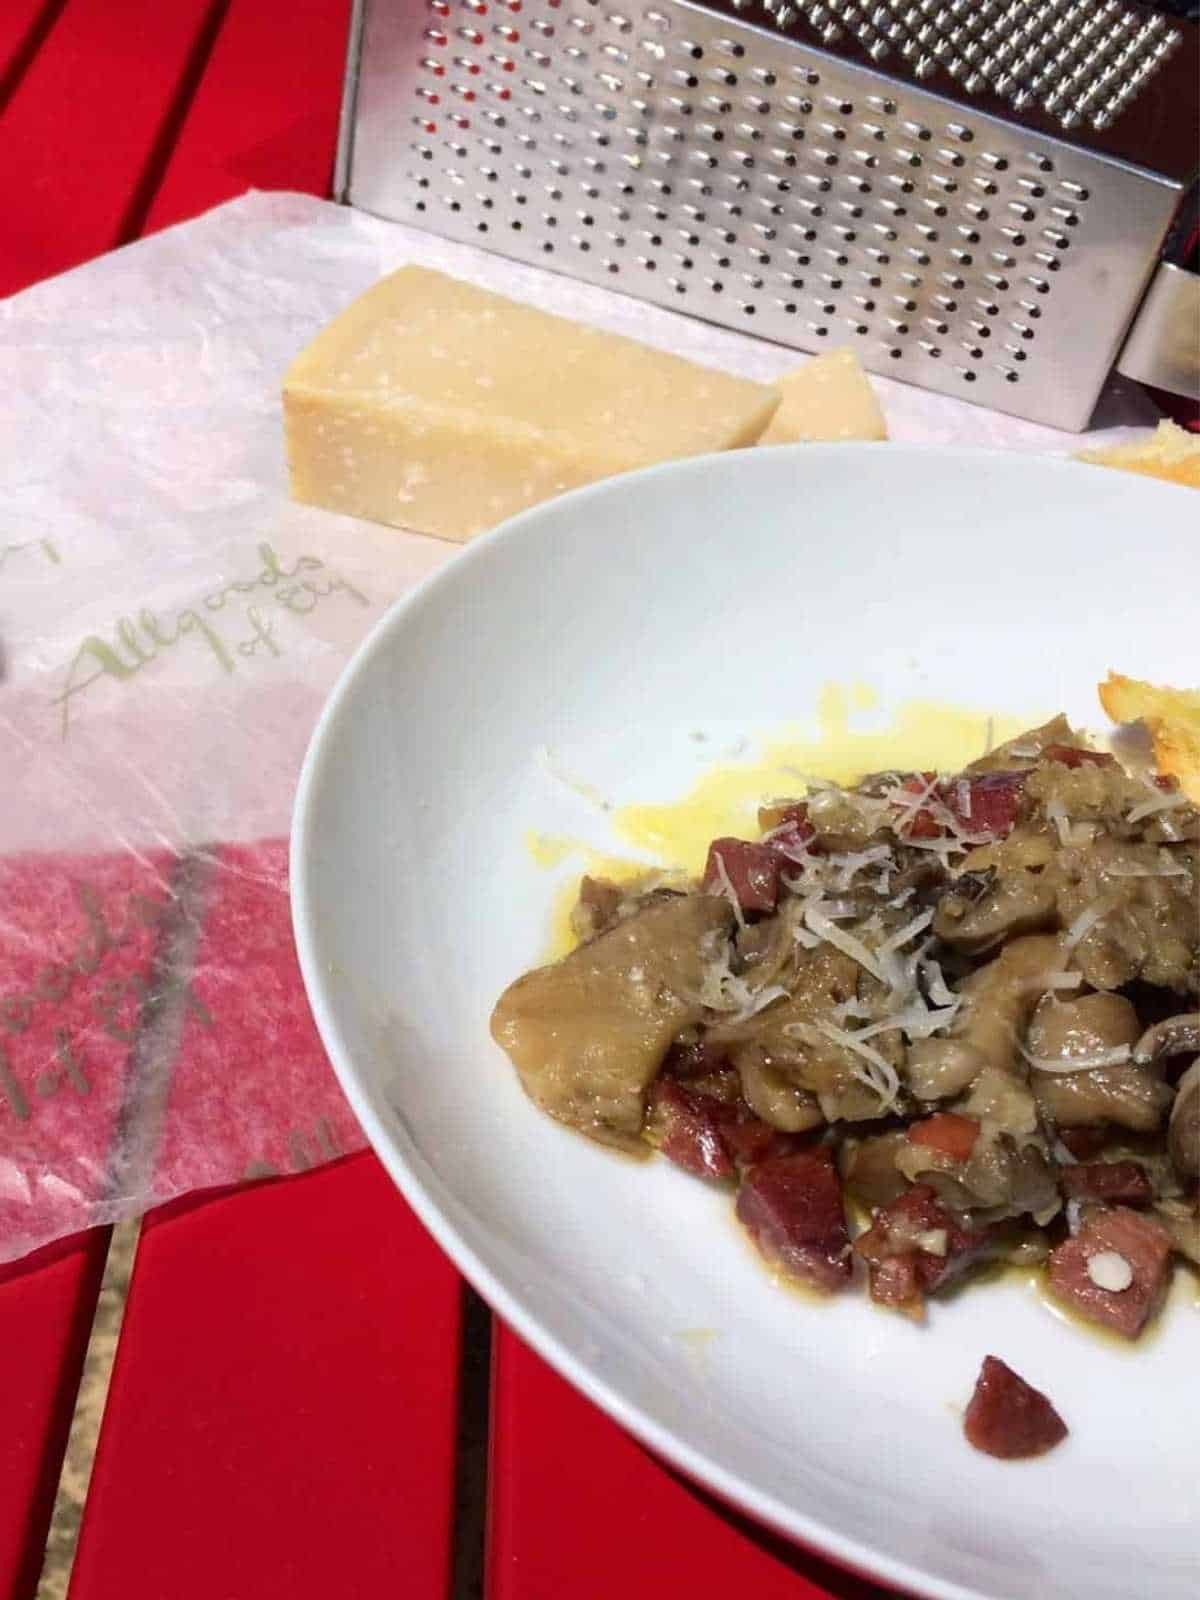 Thermomix Spanish Mushrooms with serrano ham, setasl al ajillo, served on a white plate against a red slatted surface. There is a metallic cheese grater at the top of the photo and a wedge of parmesan cheese resting on wax paper